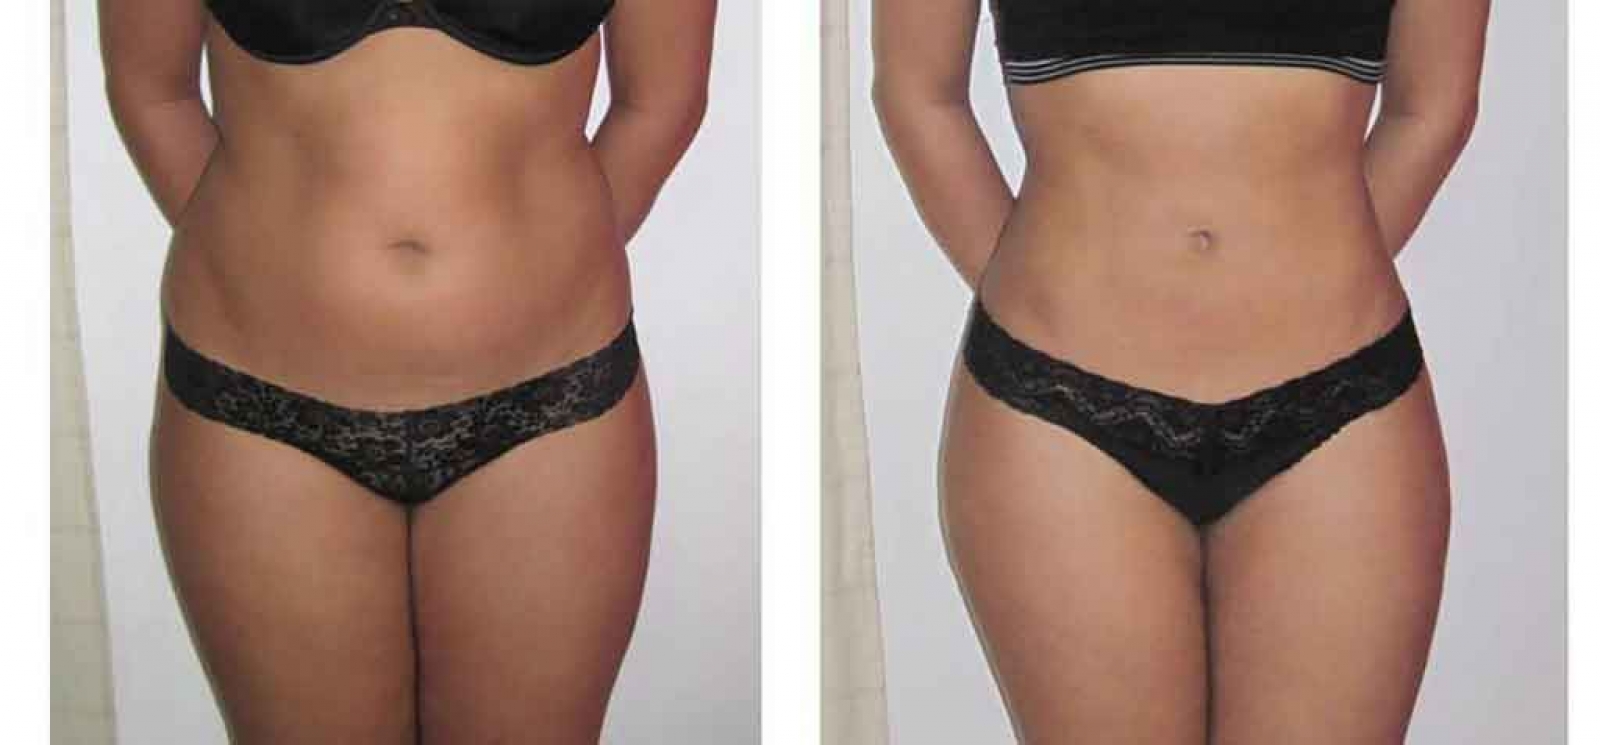 Liposuction (absorption of excess fat from various parts of the body)